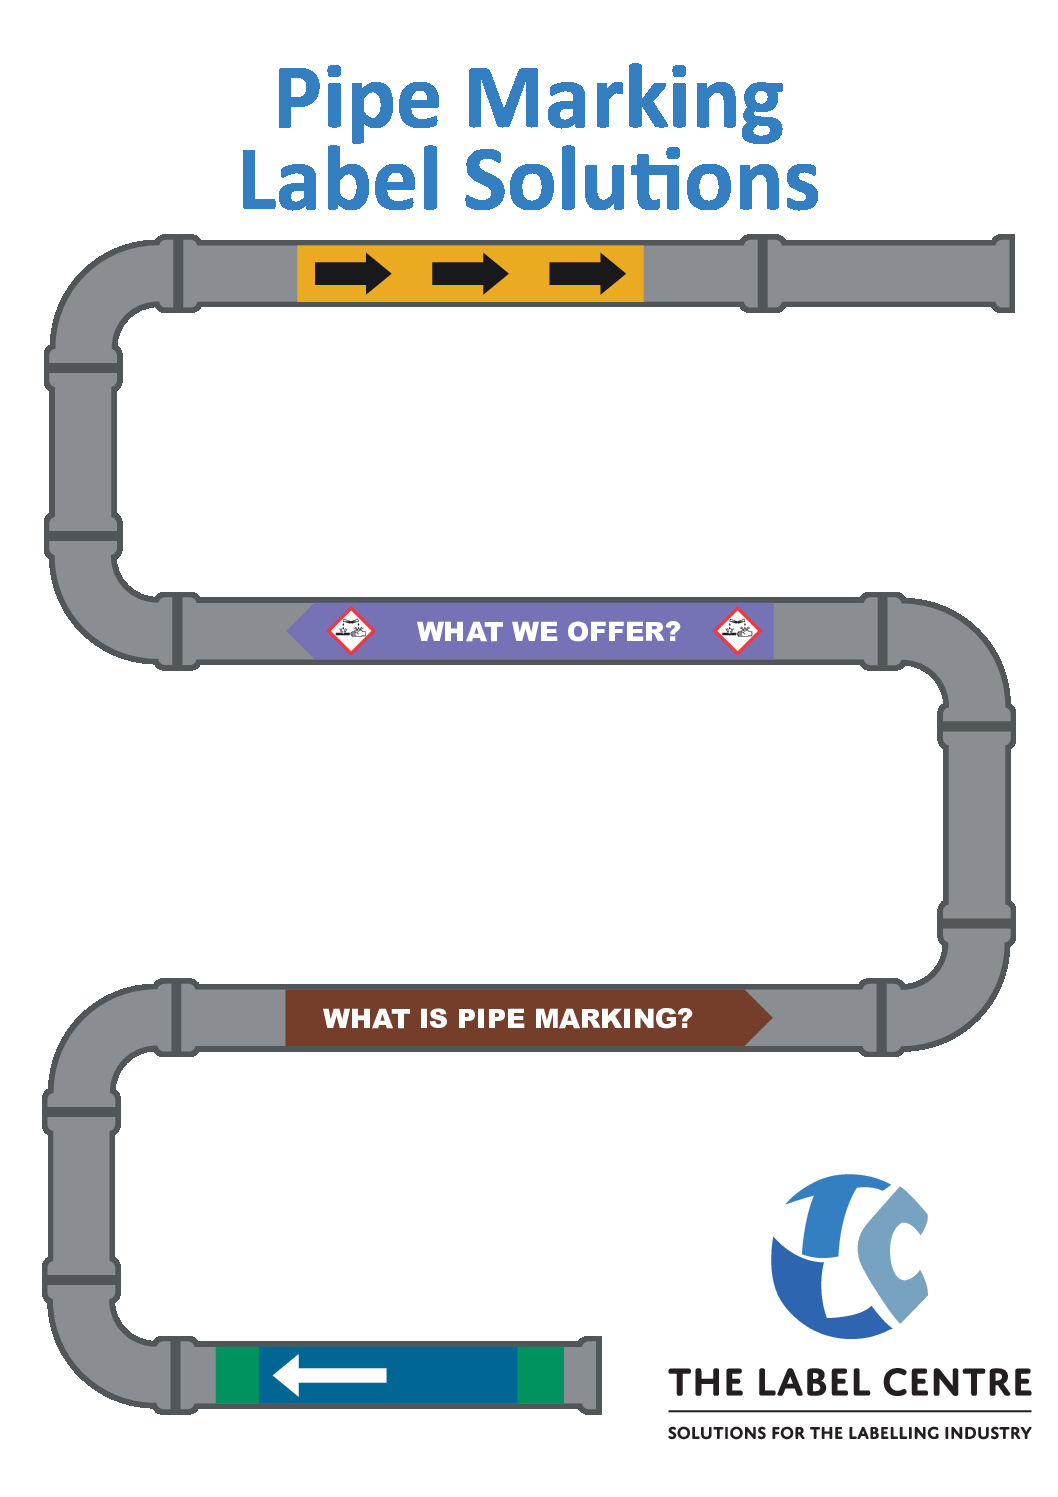 Pipe-Marking-Label-Solutions.pdf